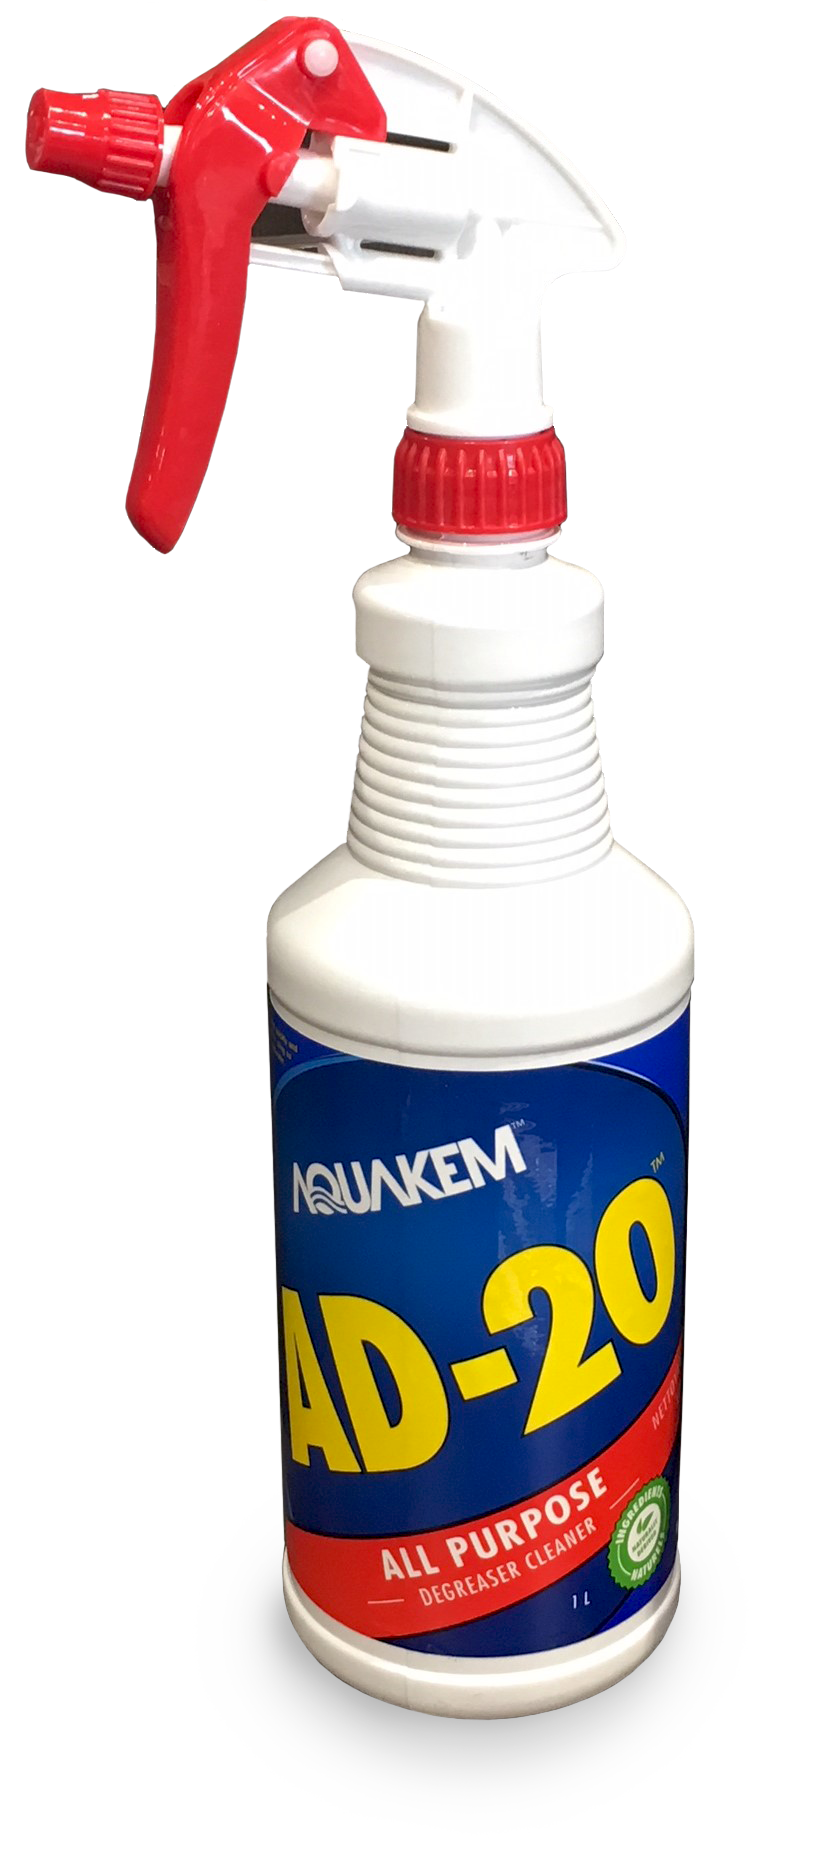 Étiquette rouge AD20 ™ DeGreaser